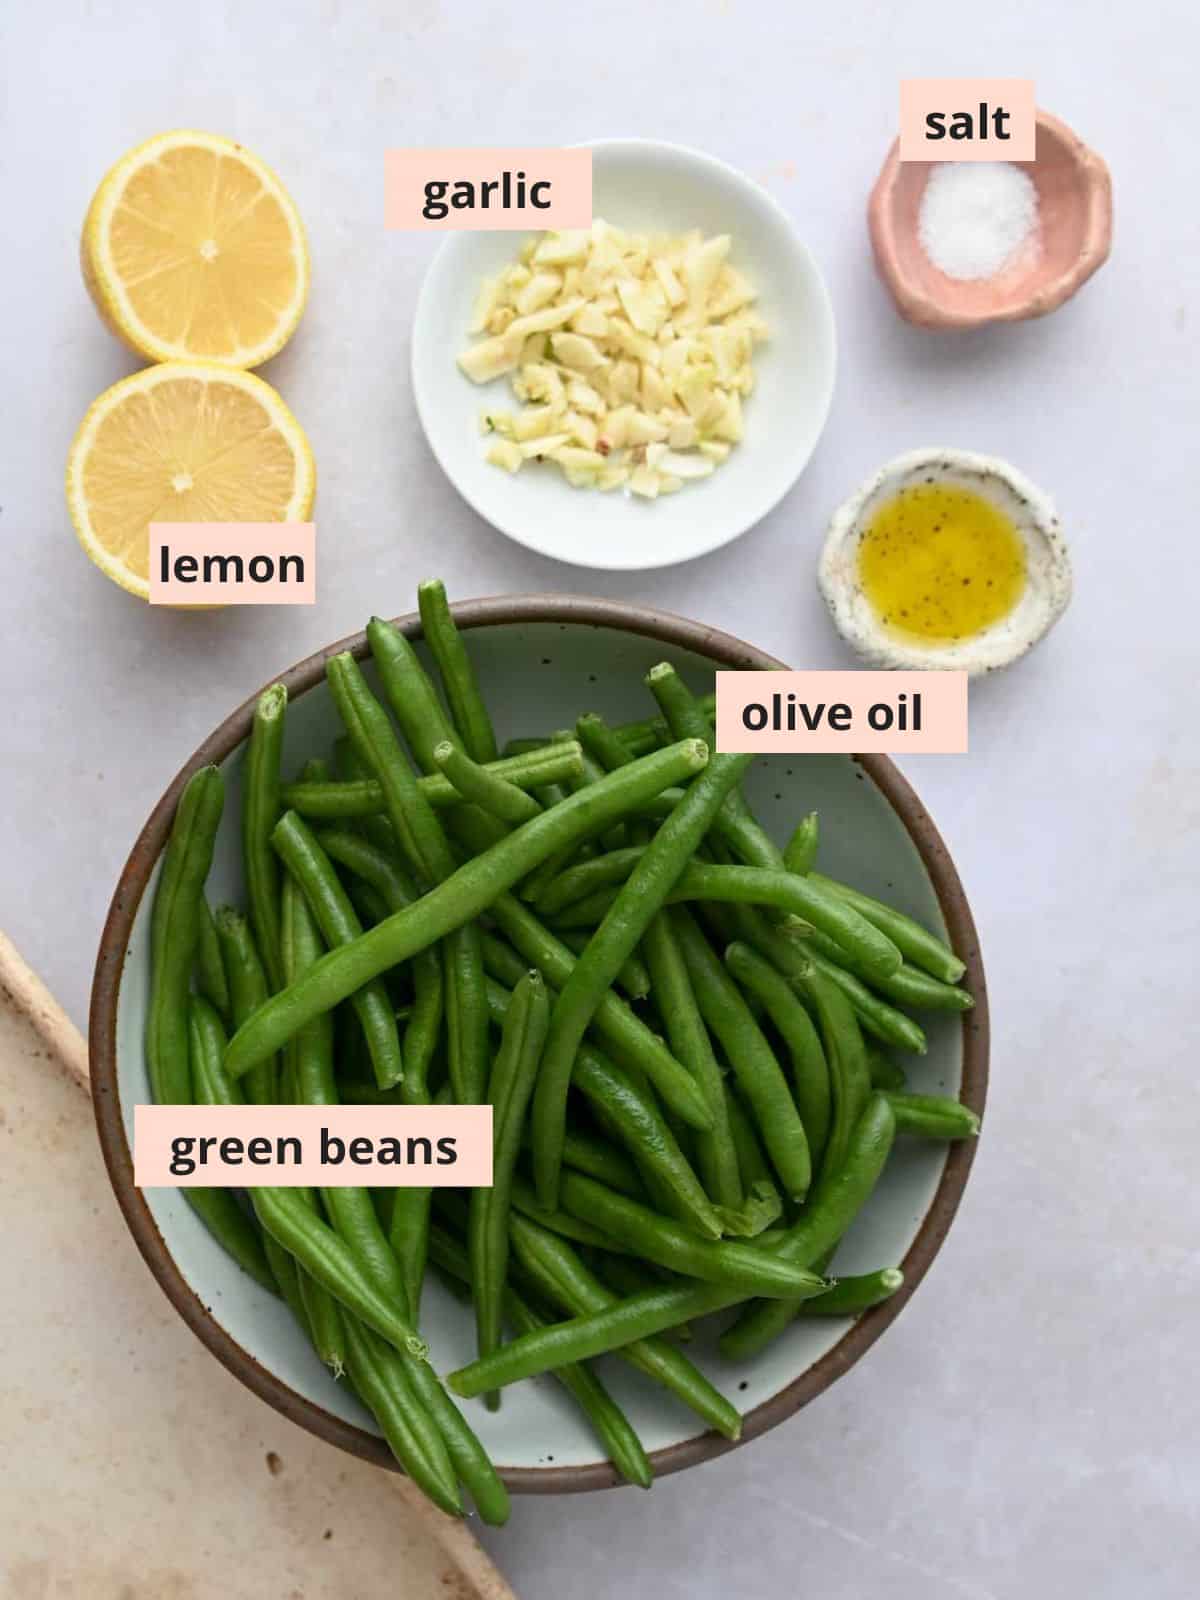 Labeled ingredients used to make roasted green beans.